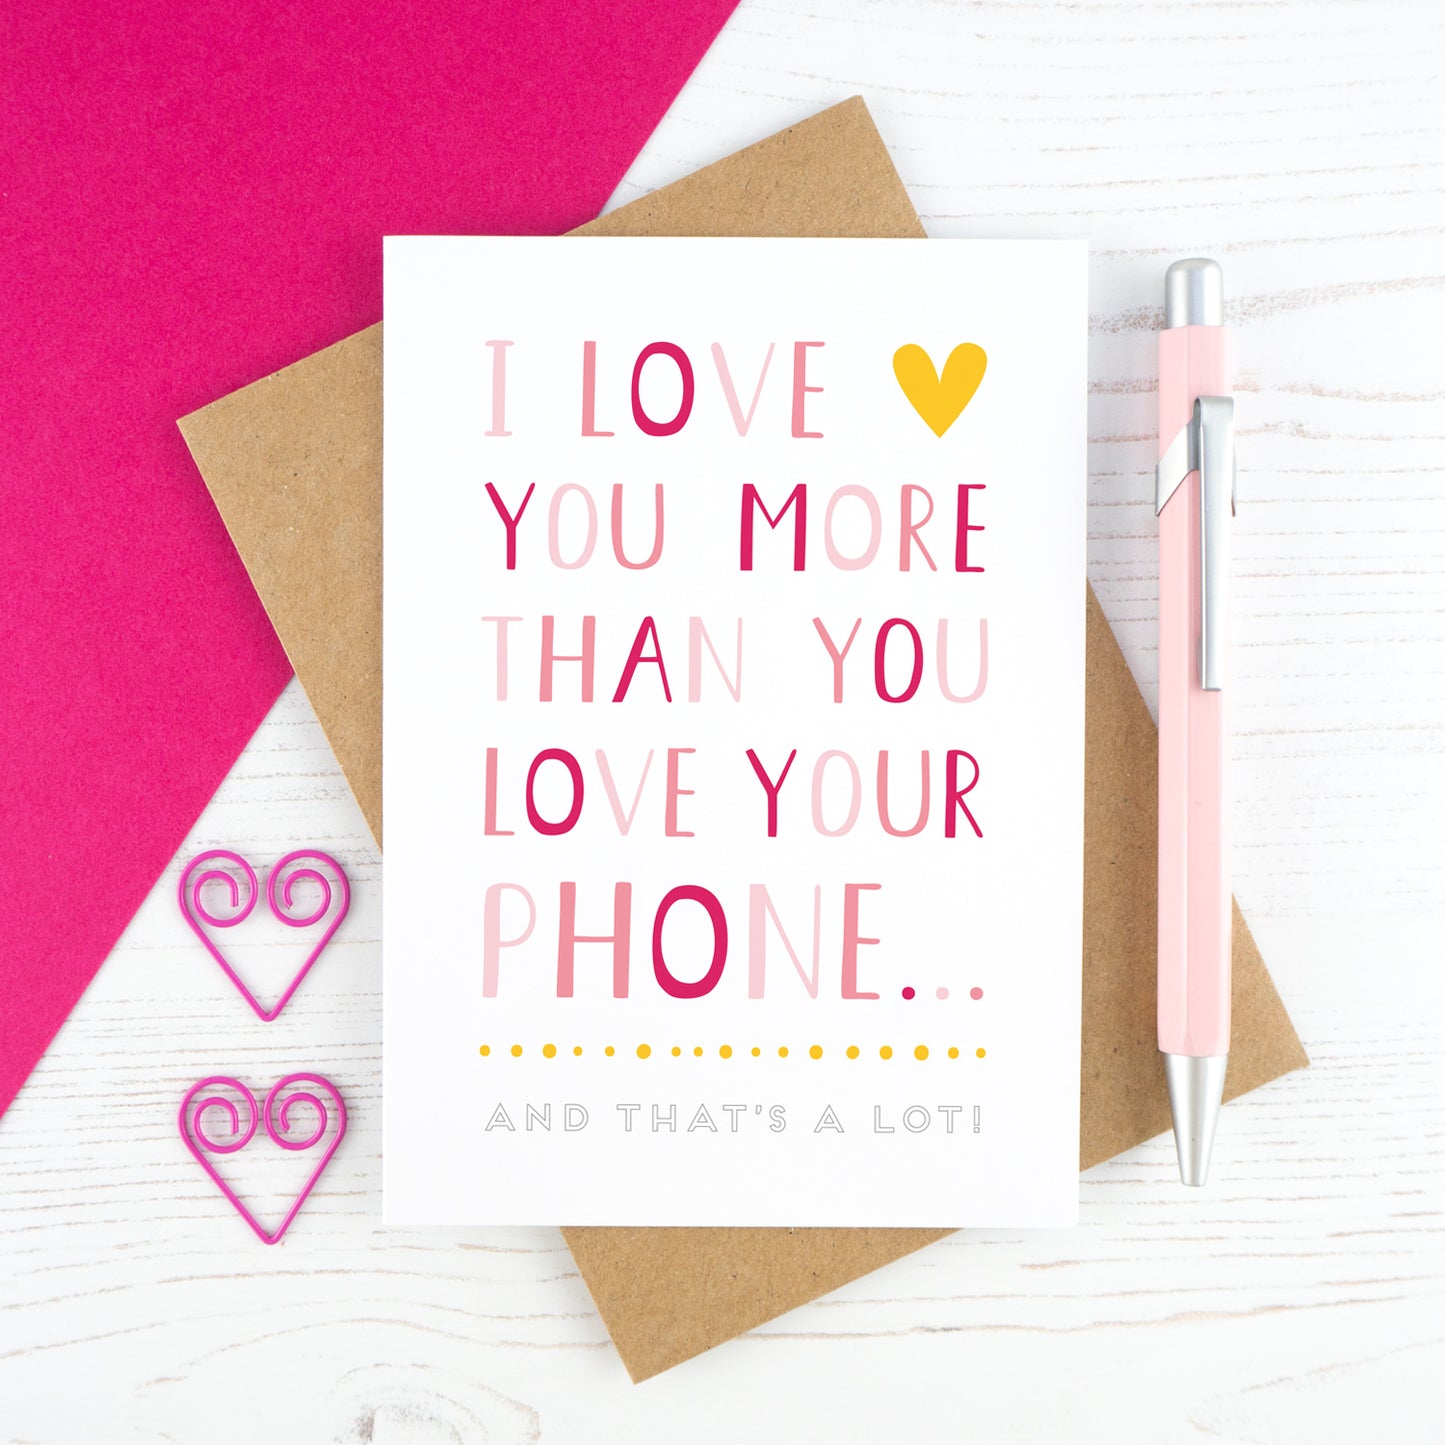 I love you more than you love your phone card - pink